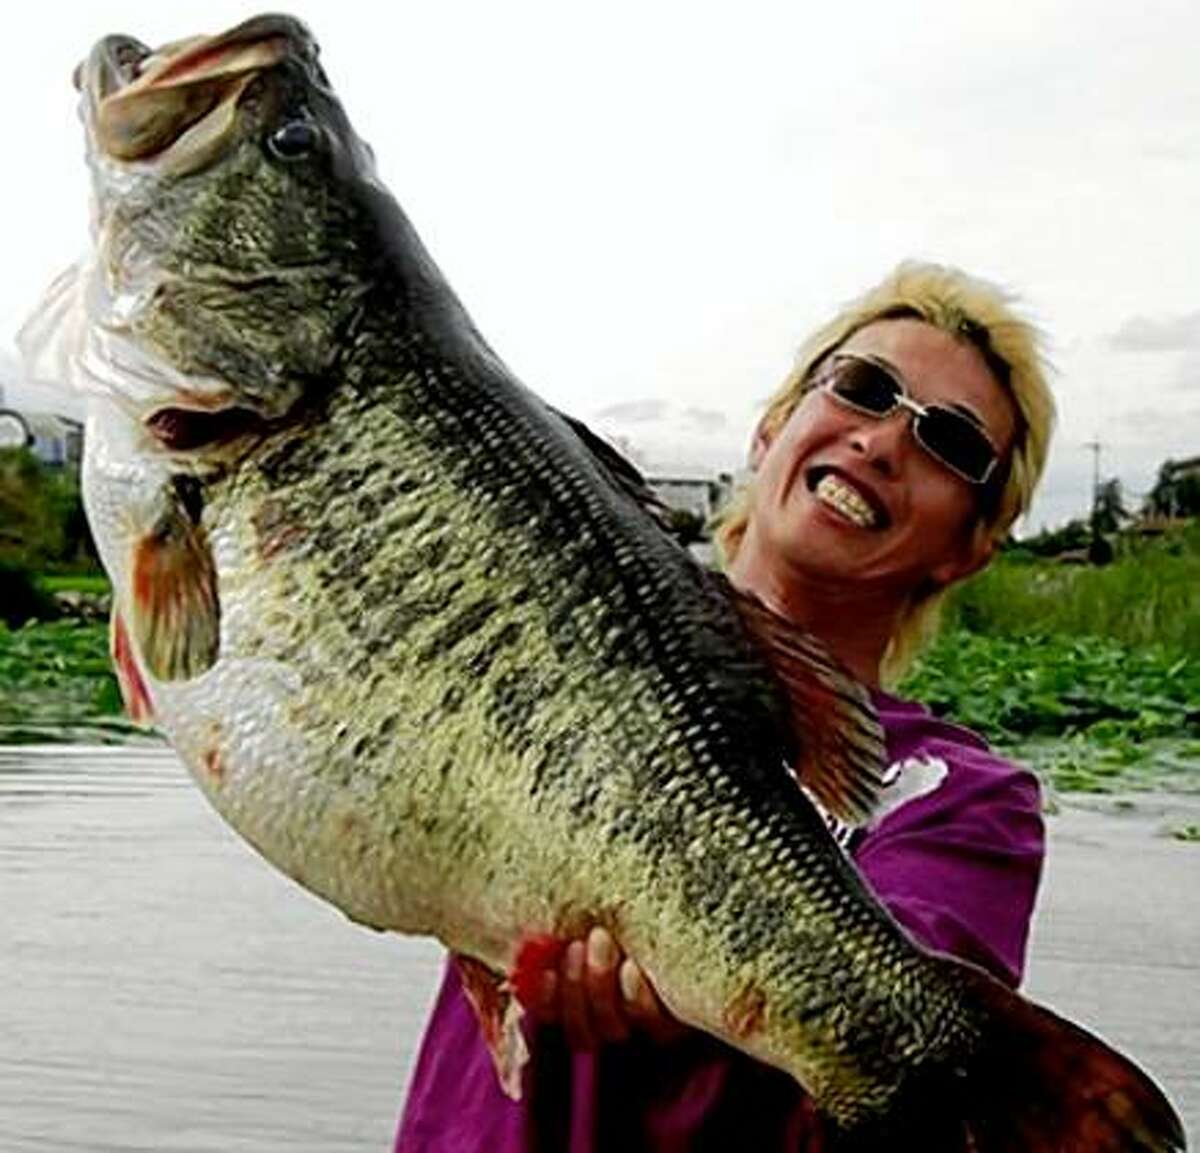 Manabu Kurita of Japan shocked the world of fishing by breaking the most cherished of all fishing records, the 75-year-old record for largemouth bass, with this bass weighing 22 pounds, 5 ounces.